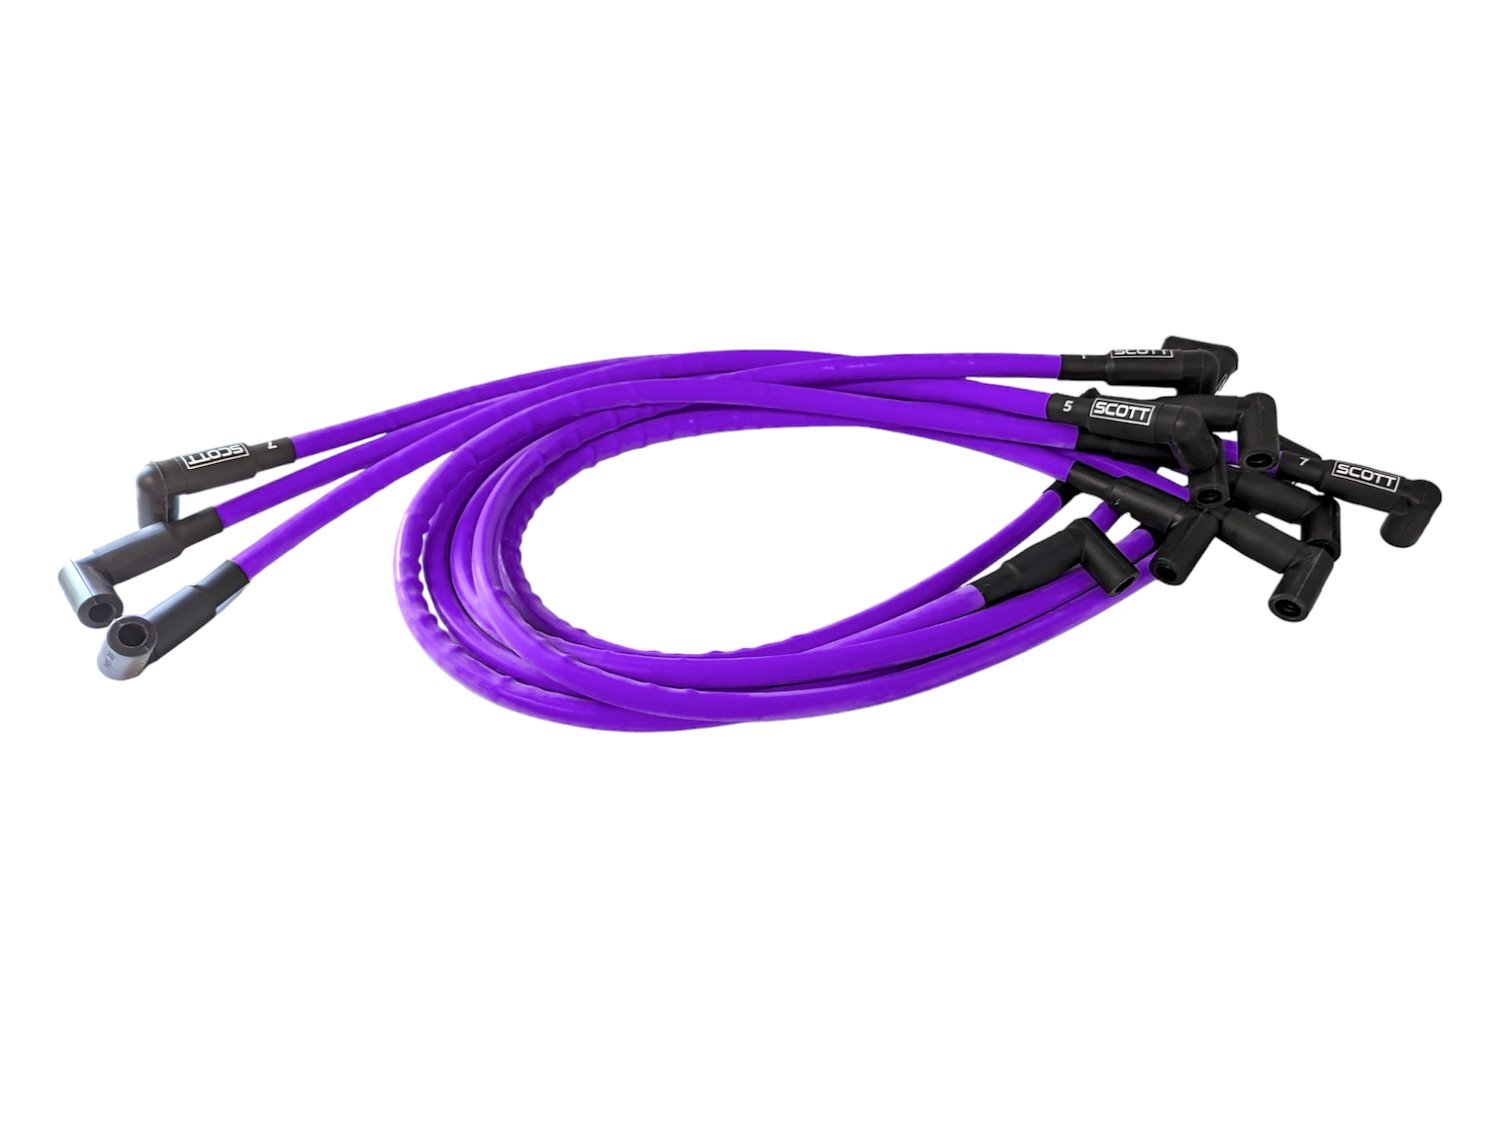 SPW300-CH-435-6 Super Mag Fiberglass-Oversleeved Spark Plug Wire Set for Small Block Chevy, Around Front [Purple]